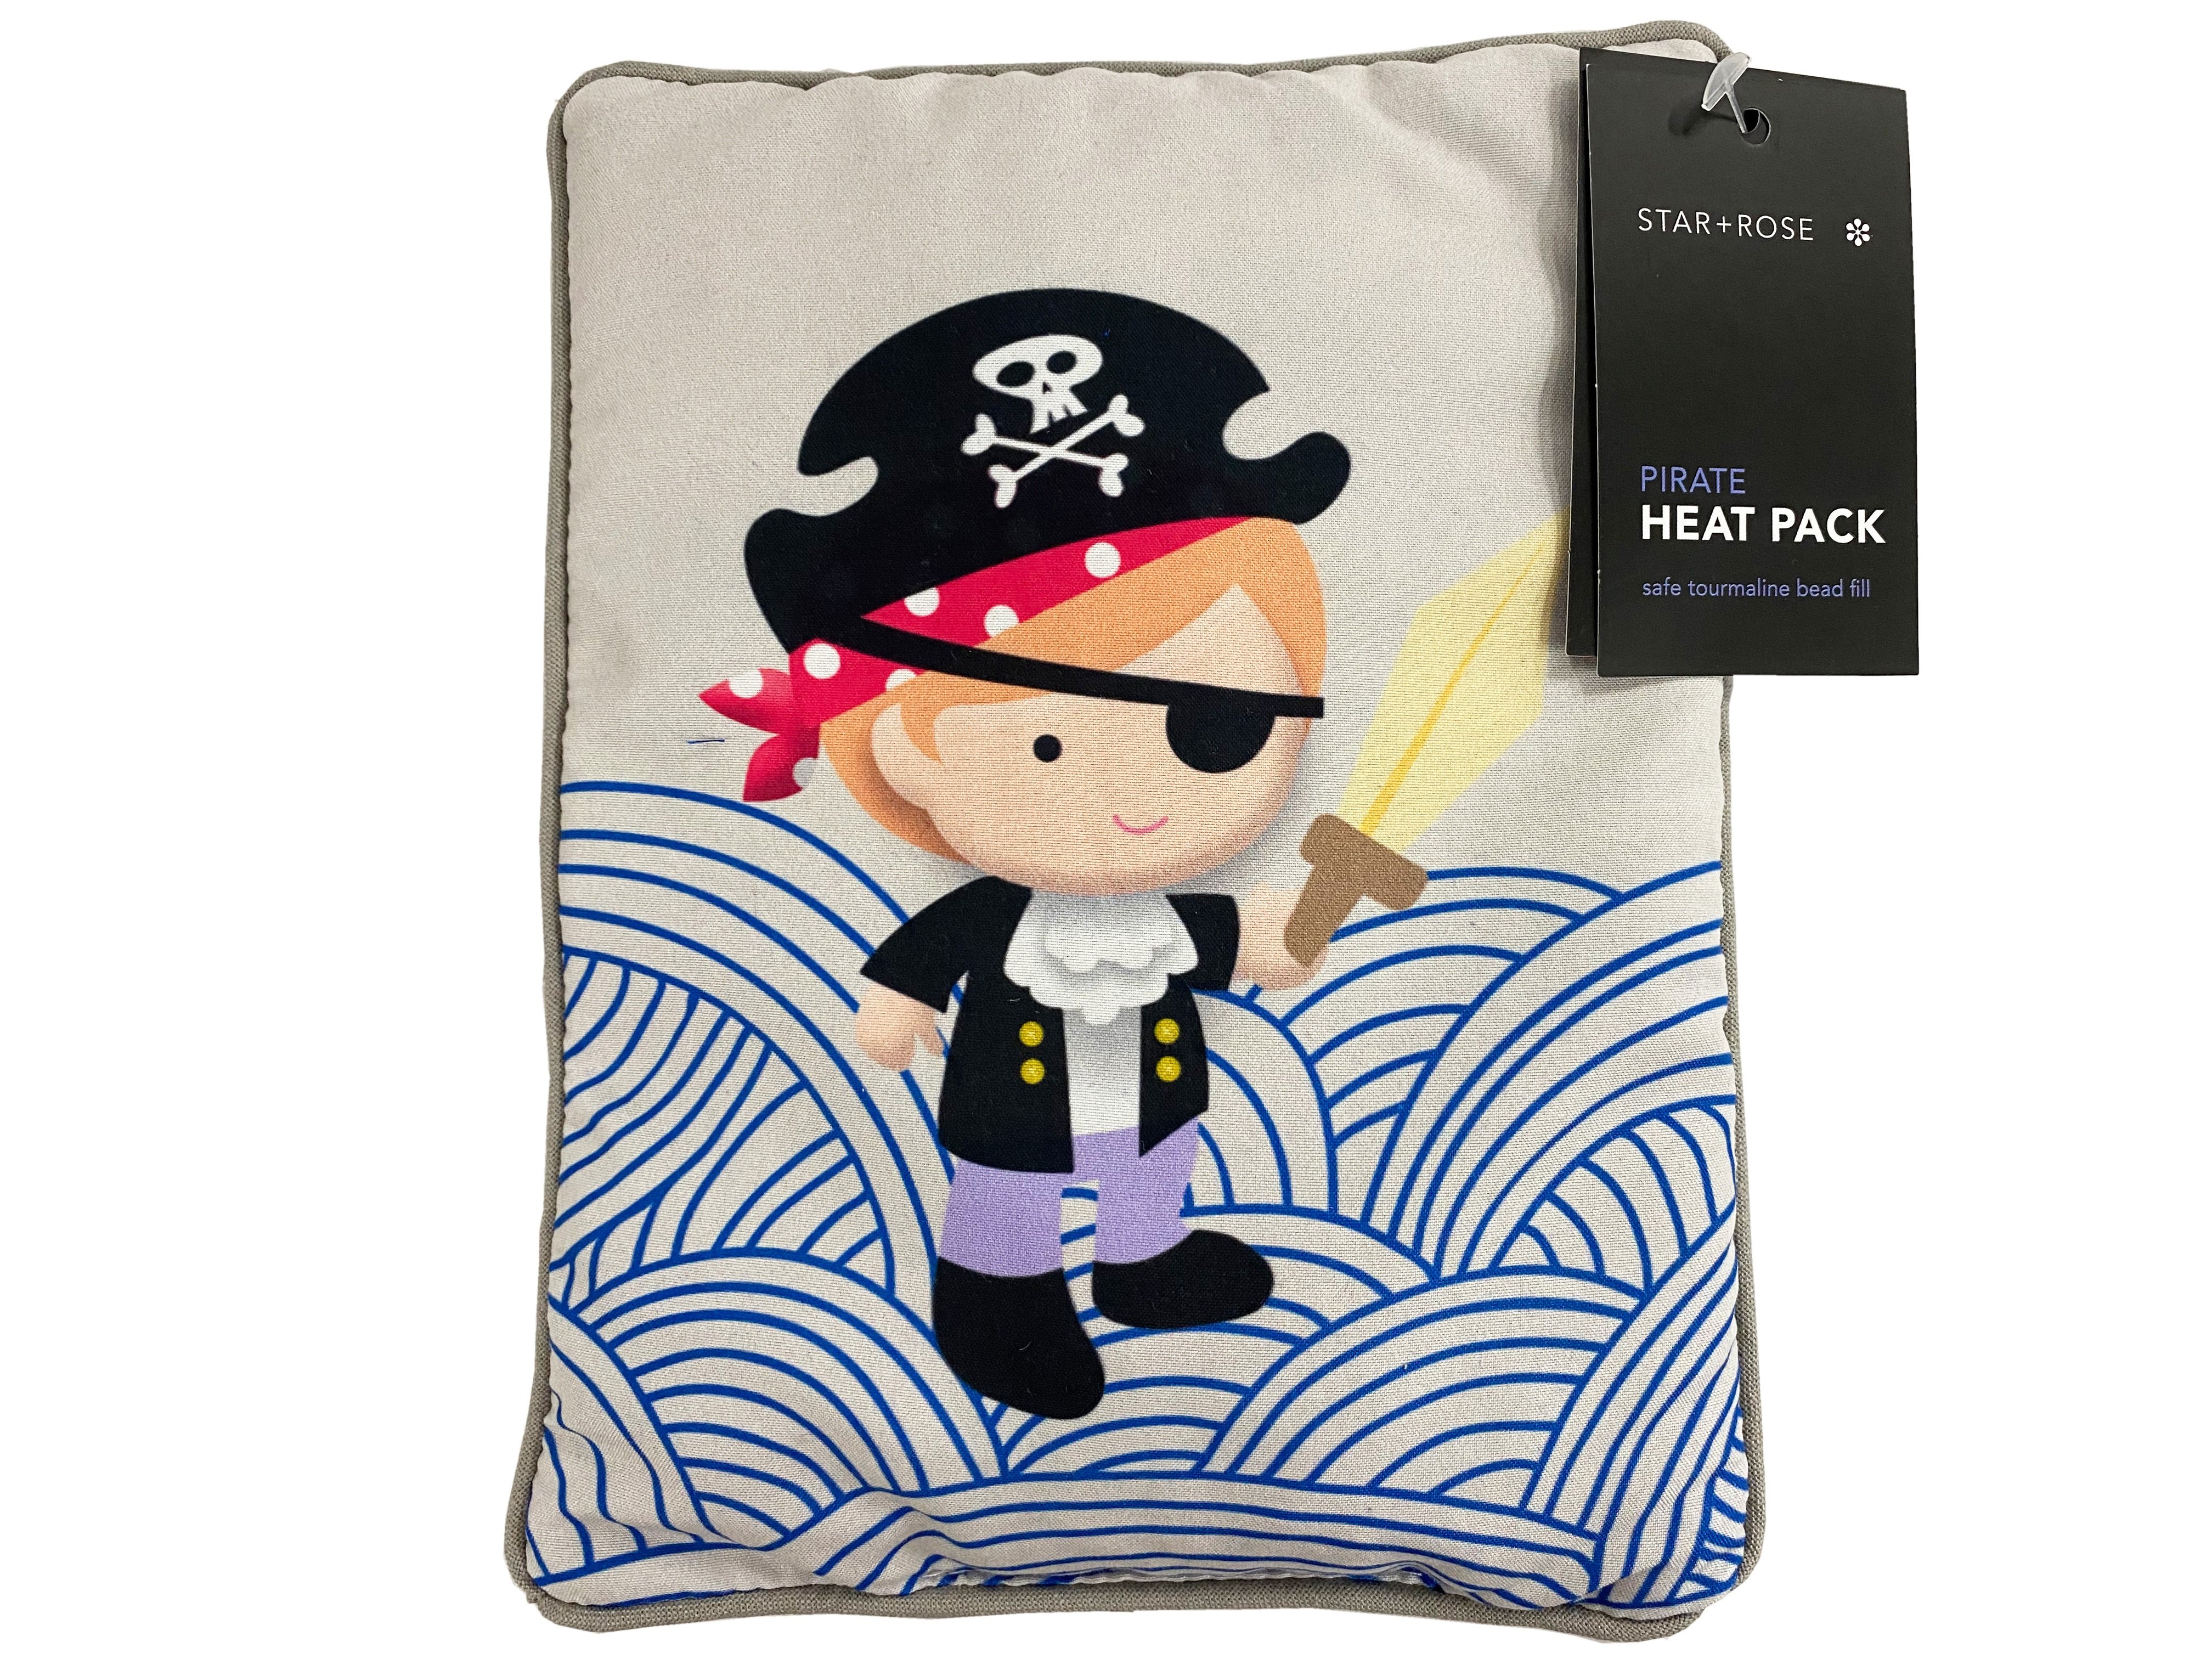 Pirate Heat Bag - Click for more info